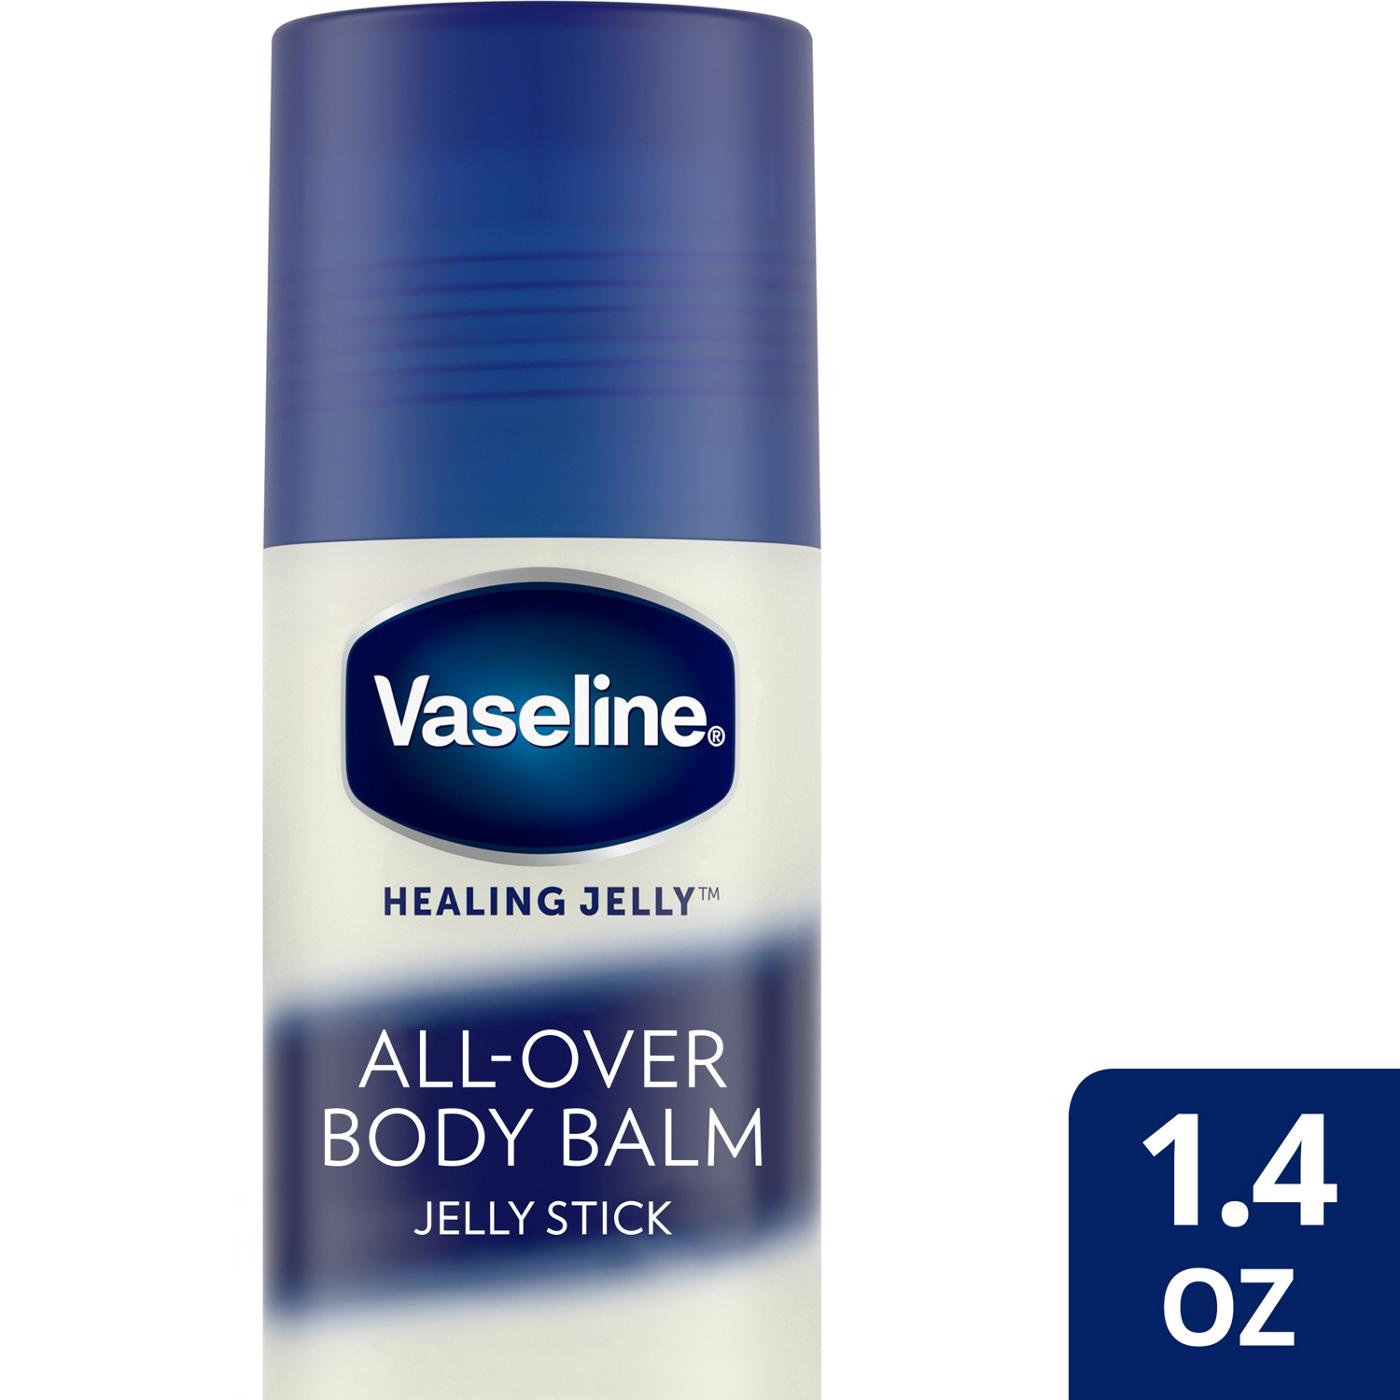 Vaseline Healing Jelly Unscented Body Balm Stick; image 3 of 3